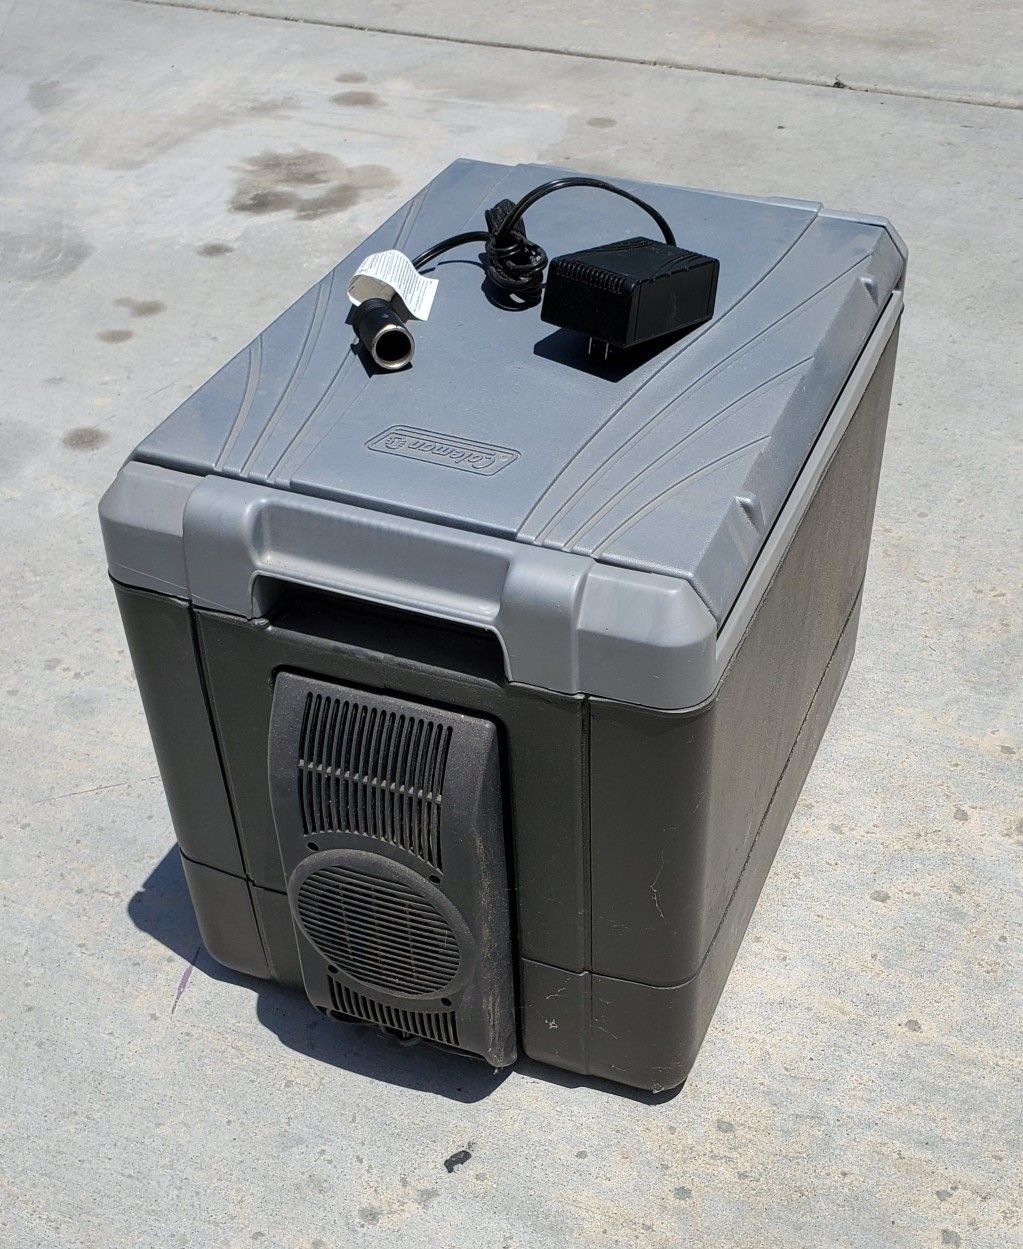 Camping / RV / tailgating electric cooler